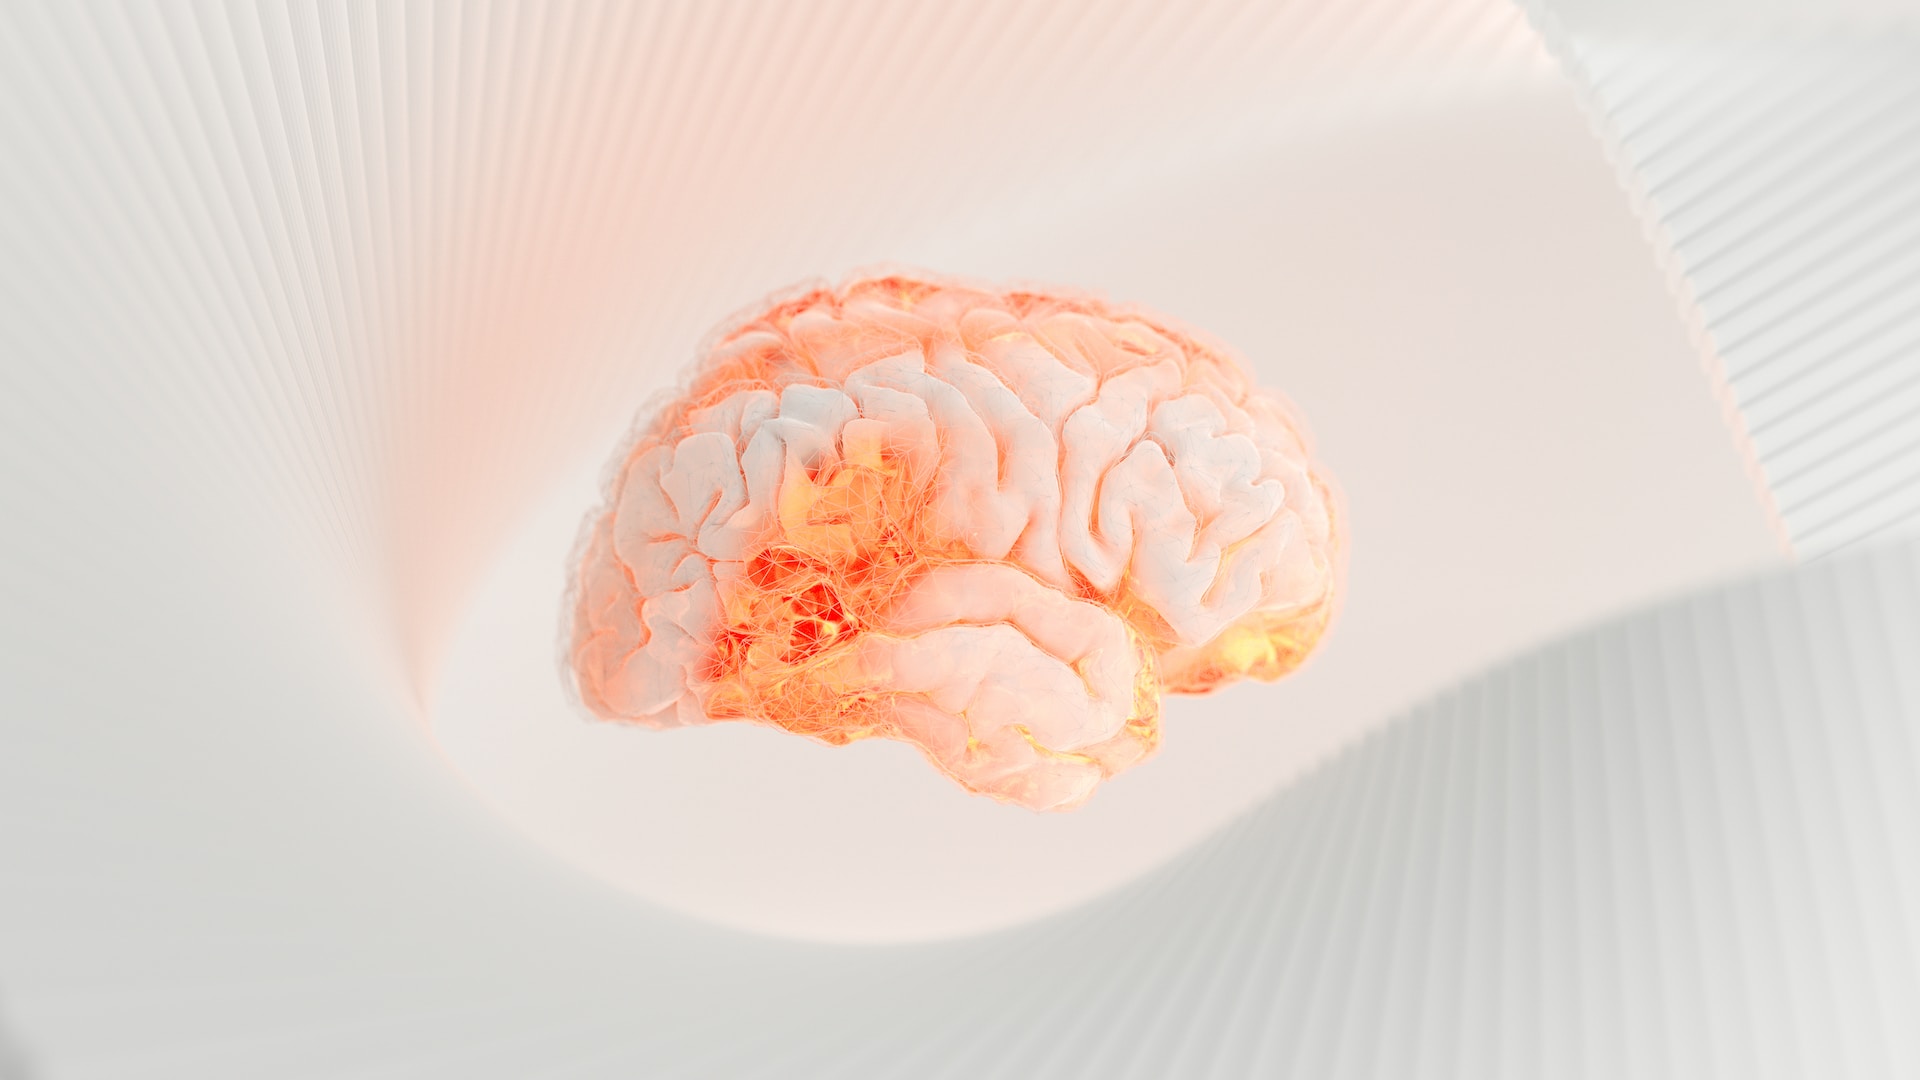 A computer generated image of the human brain on an abstract background.